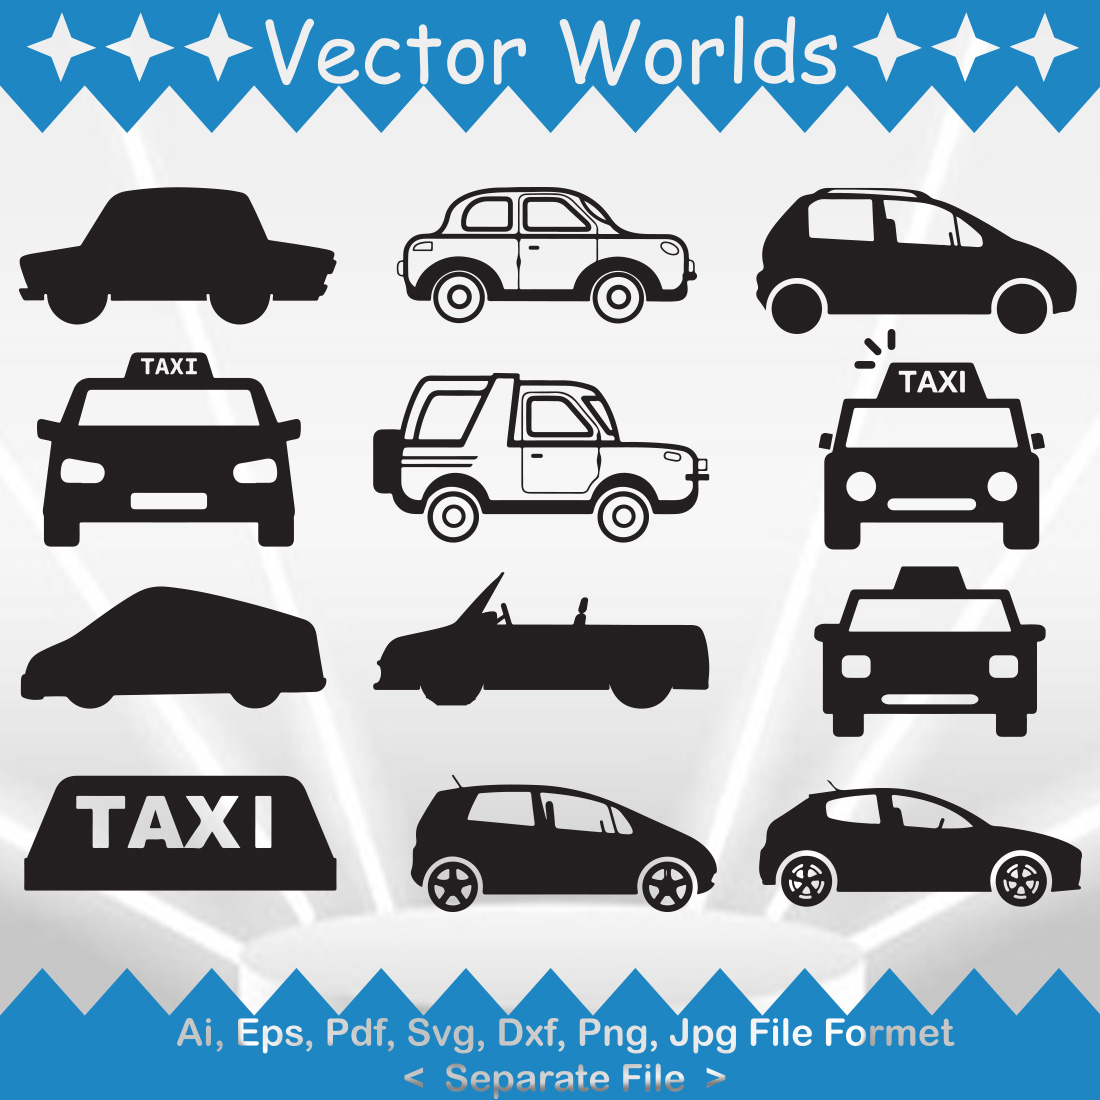 Taxi SVG Vector Design cover image.